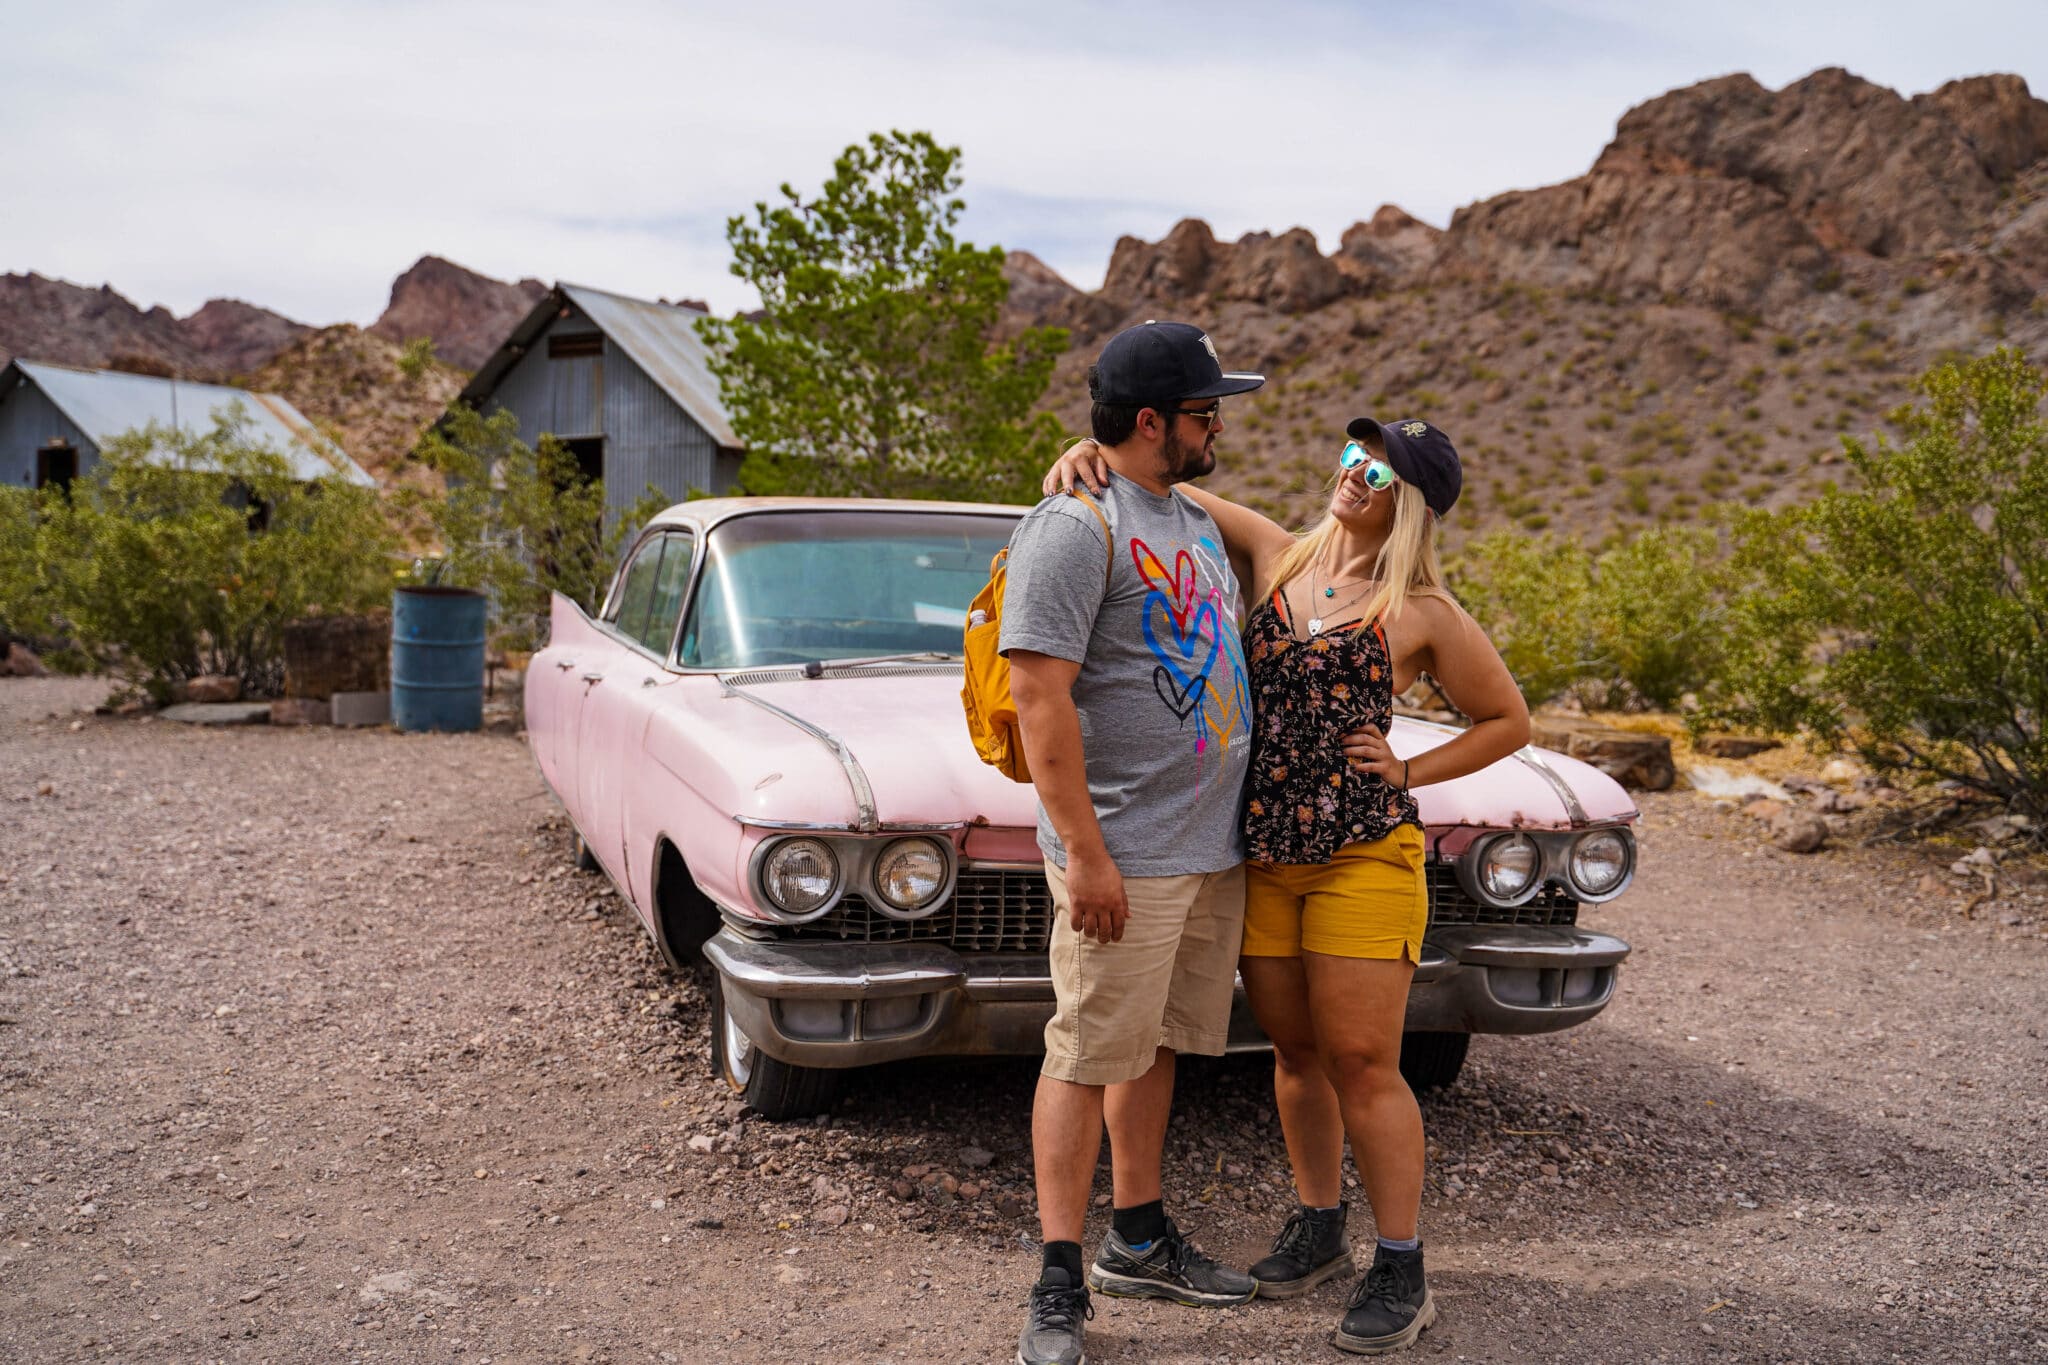 newly engaged couple standing in front of an old car on a dirt road